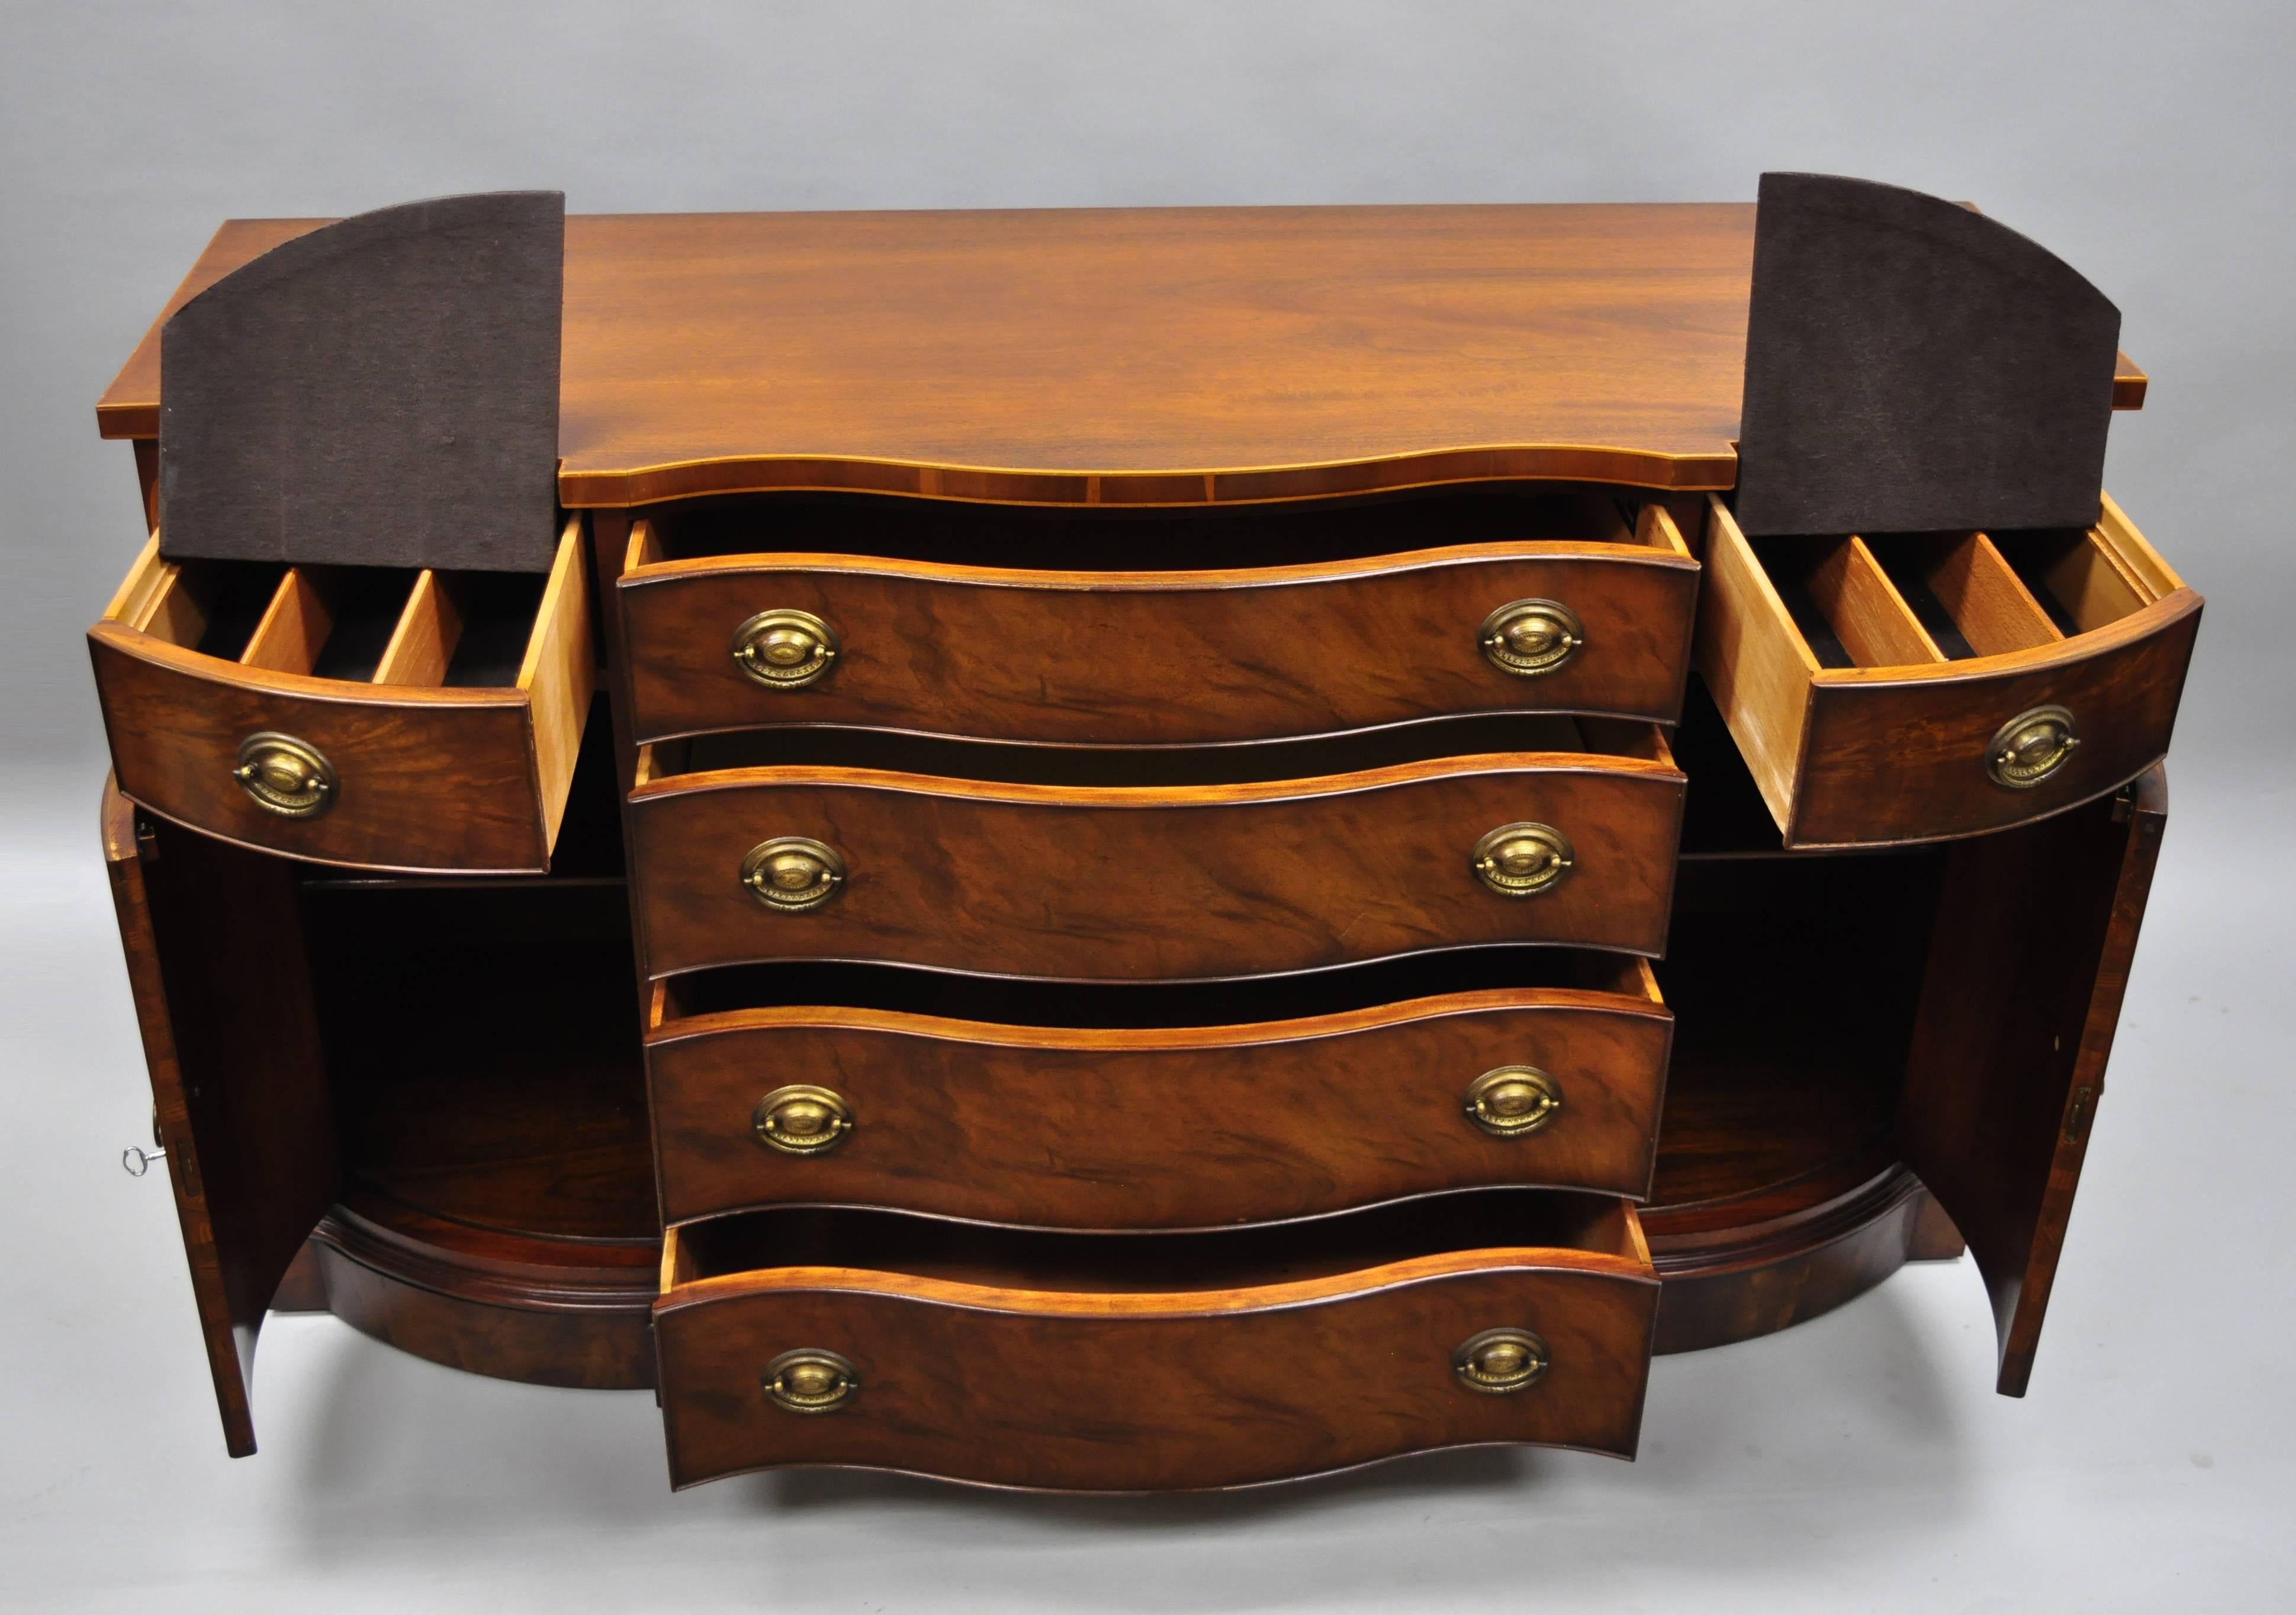 Drexel Wallace nutting serpentine front mahogany sideboard buffet. Item details shell and spiral satinwood inlay, beautiful wood grain, two swing doors, original label, working lock and key, six dovetailed drawers, two wooden shelves, quality